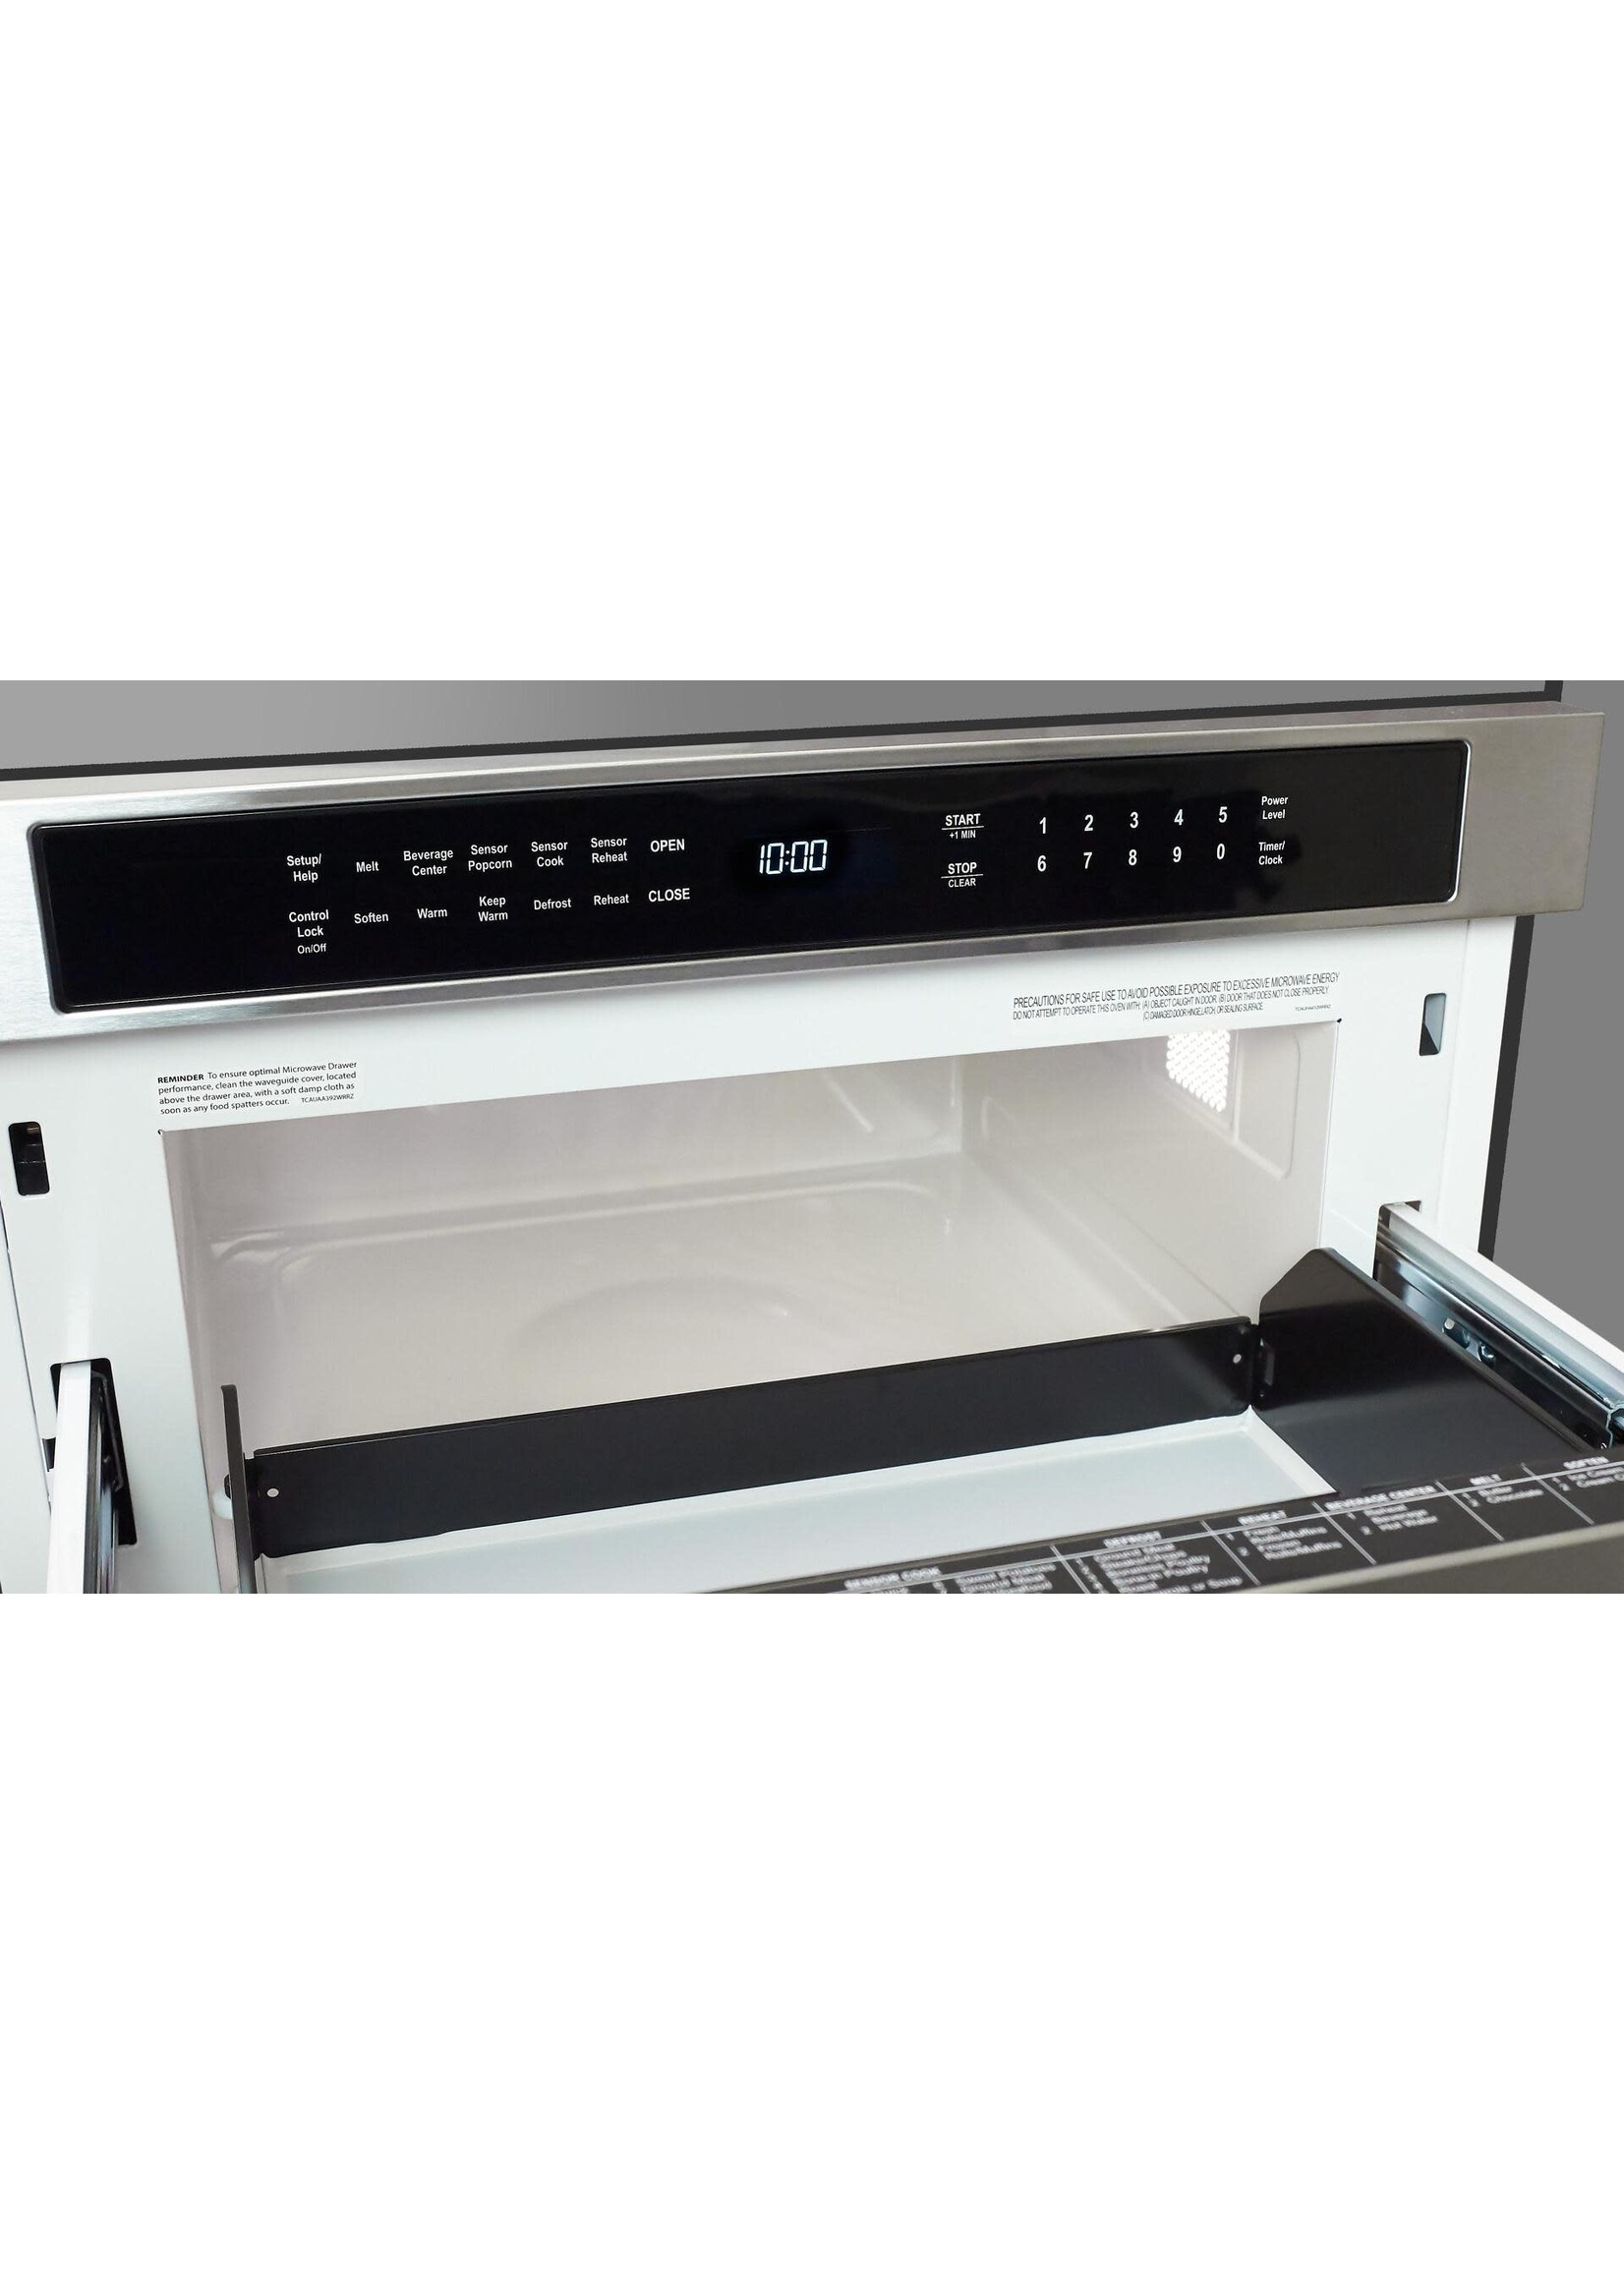 Fulgor Milano 24 Inch Built-In Drawer Microwave Oven with 1.2 Cu. Ft. Capacity